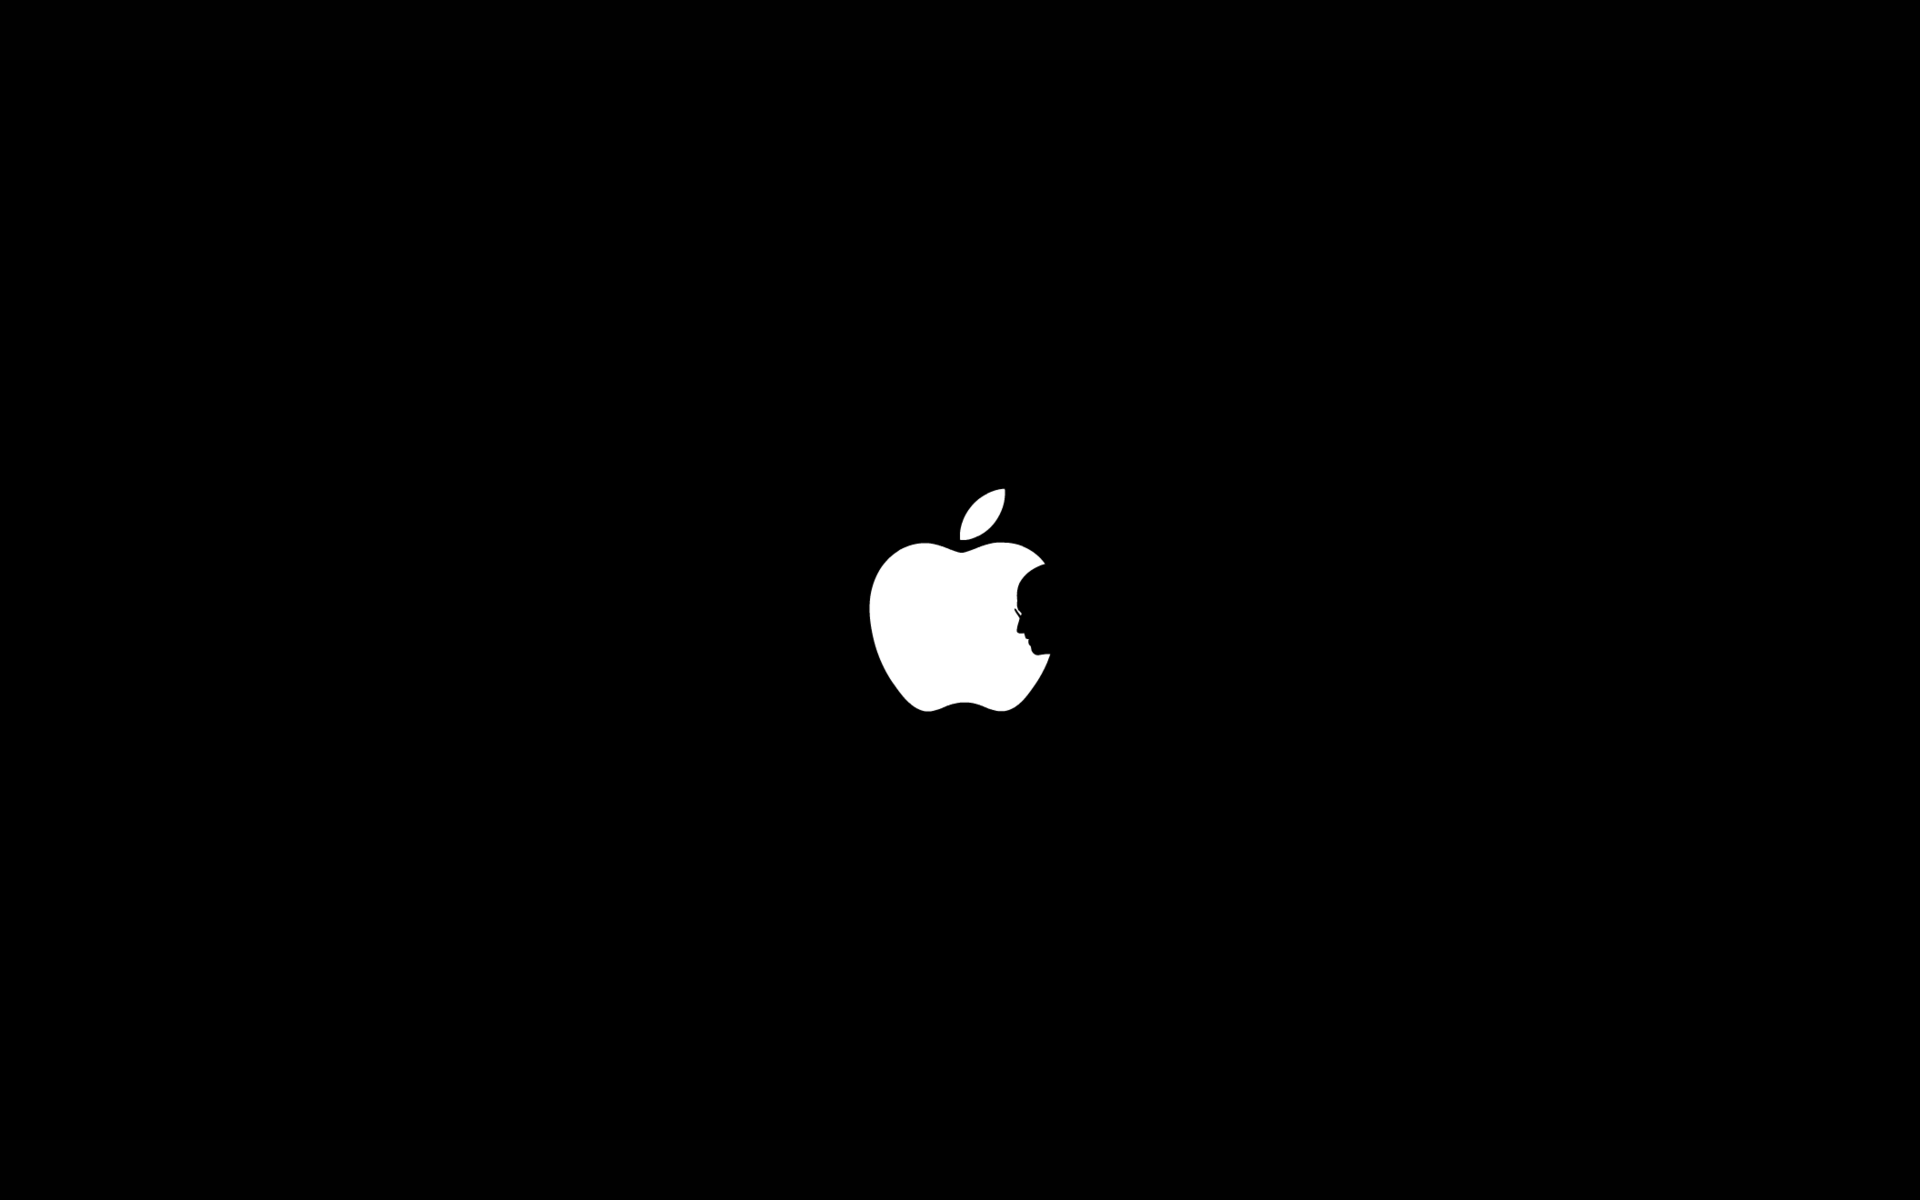 Wallpaper Black and White Apple Logo Background  Download Free Image